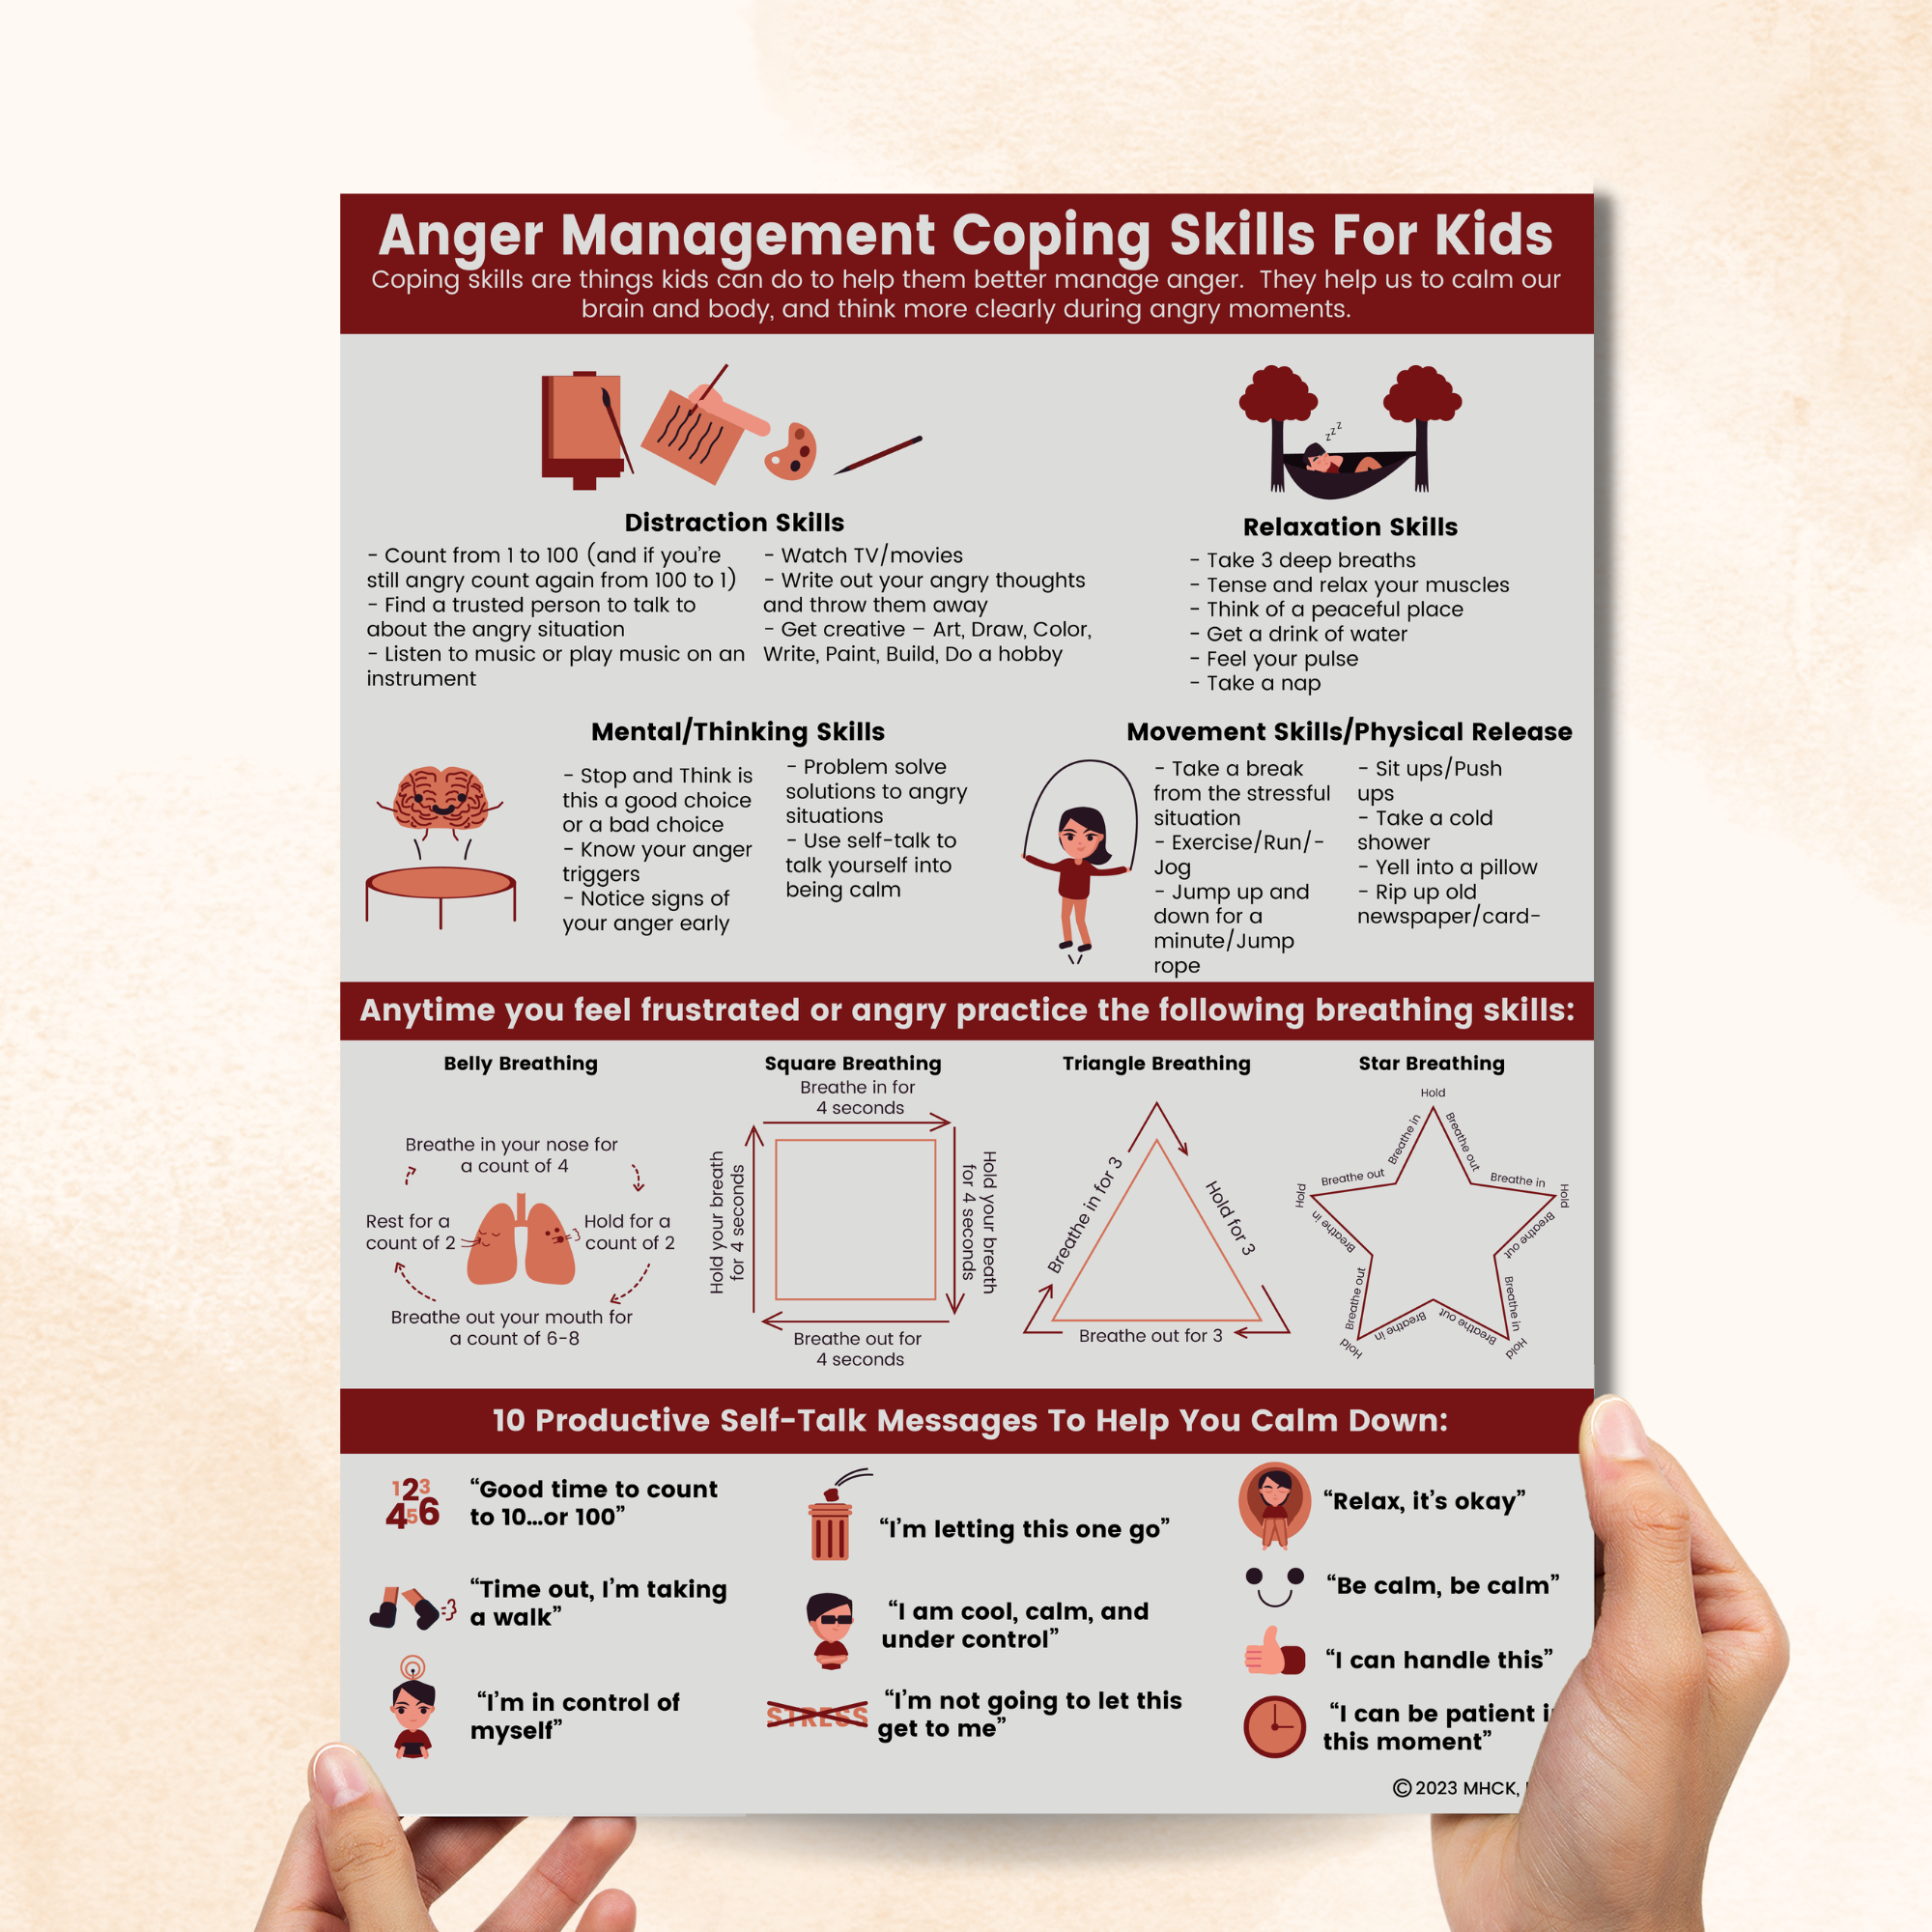 Anger Scale Coping Skills for Kids & Teens, Anger Management